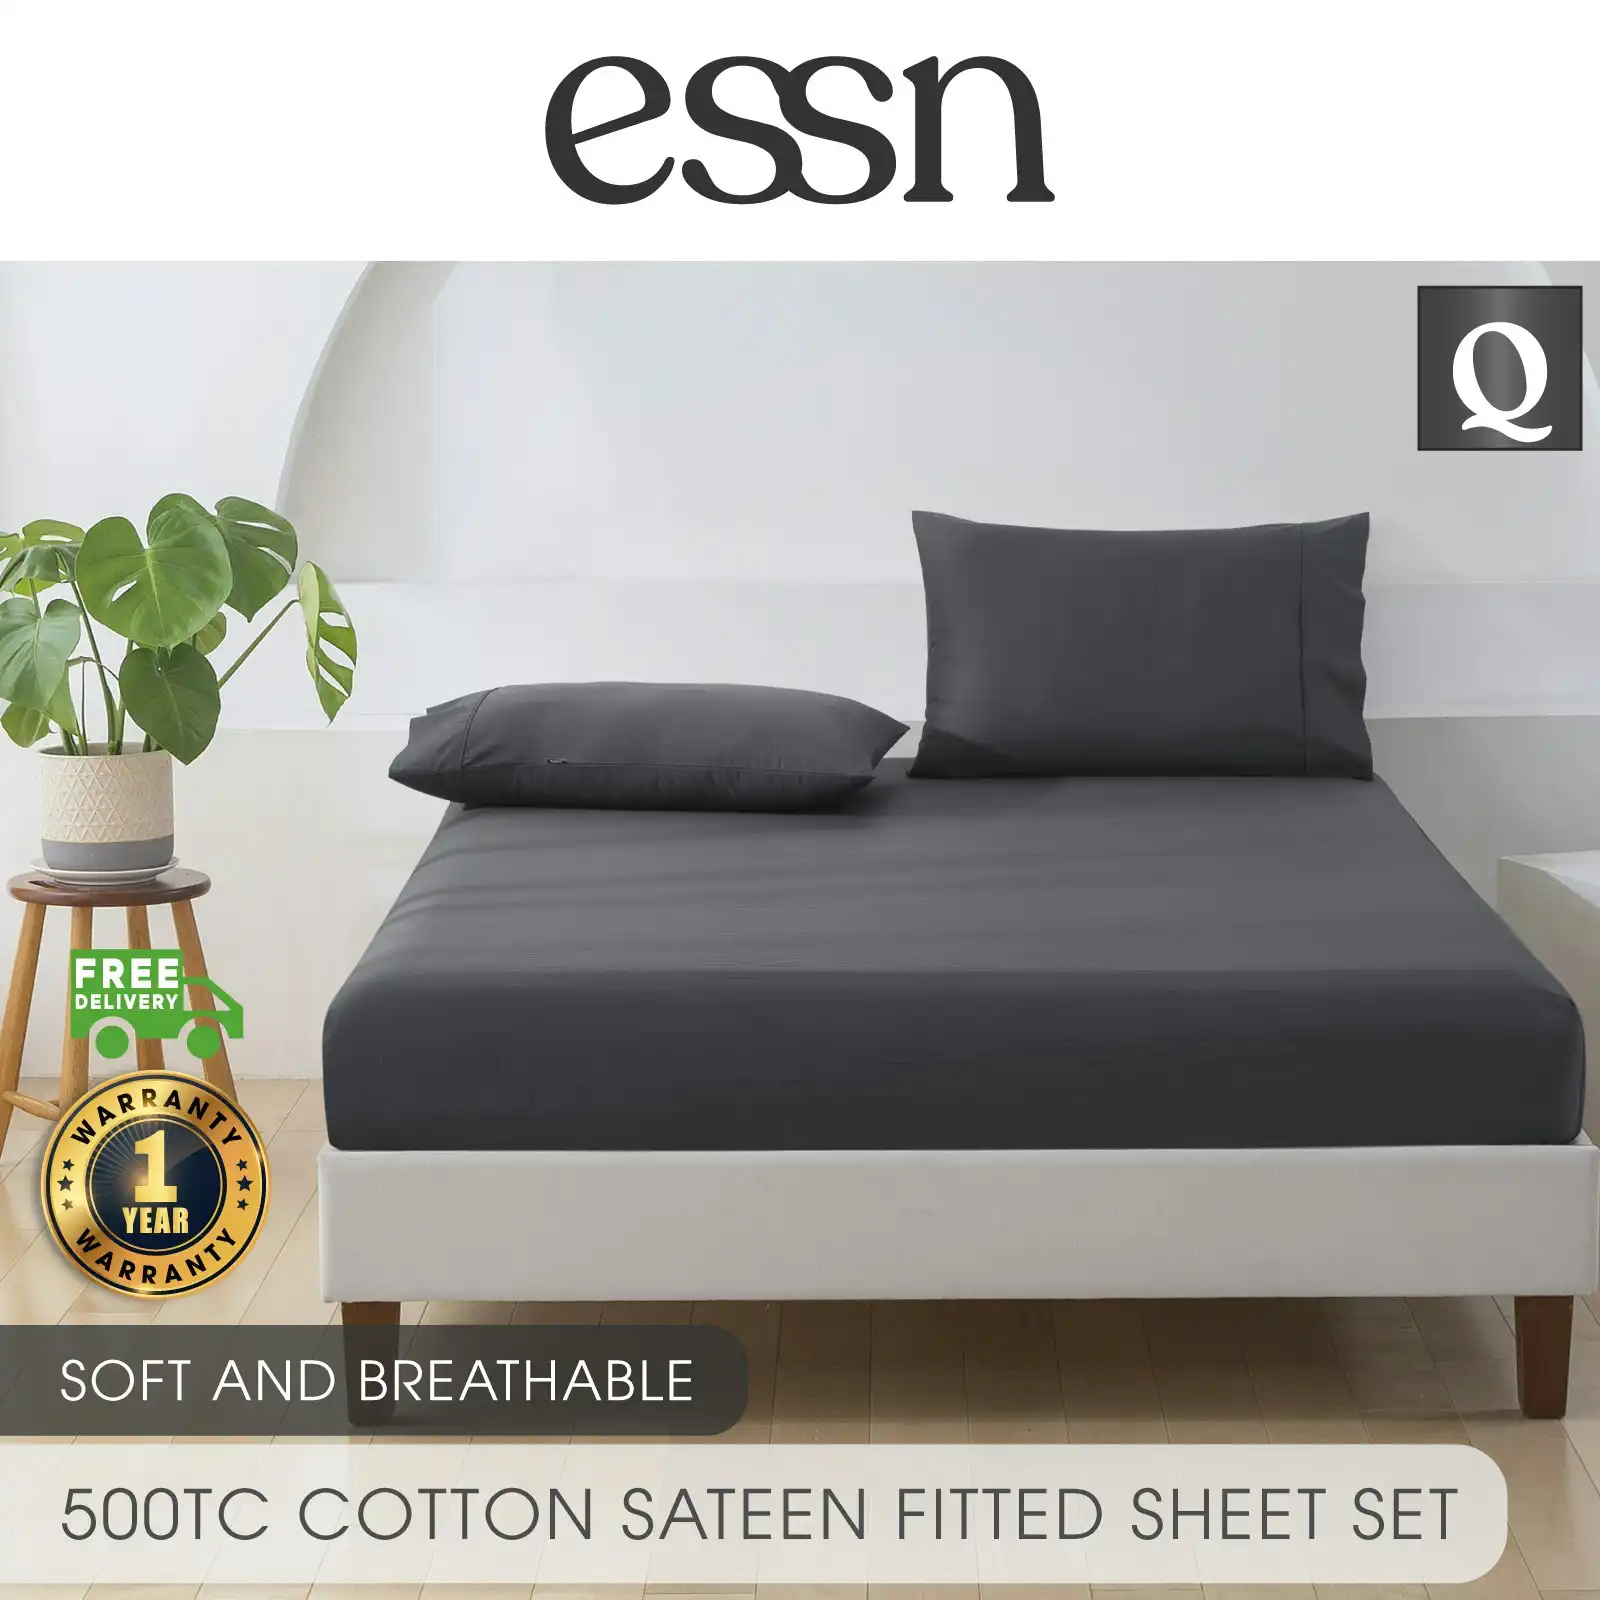 ESSN 500TC Cotton Sateen Fitted Sheet Set Charcoal Queen Bed